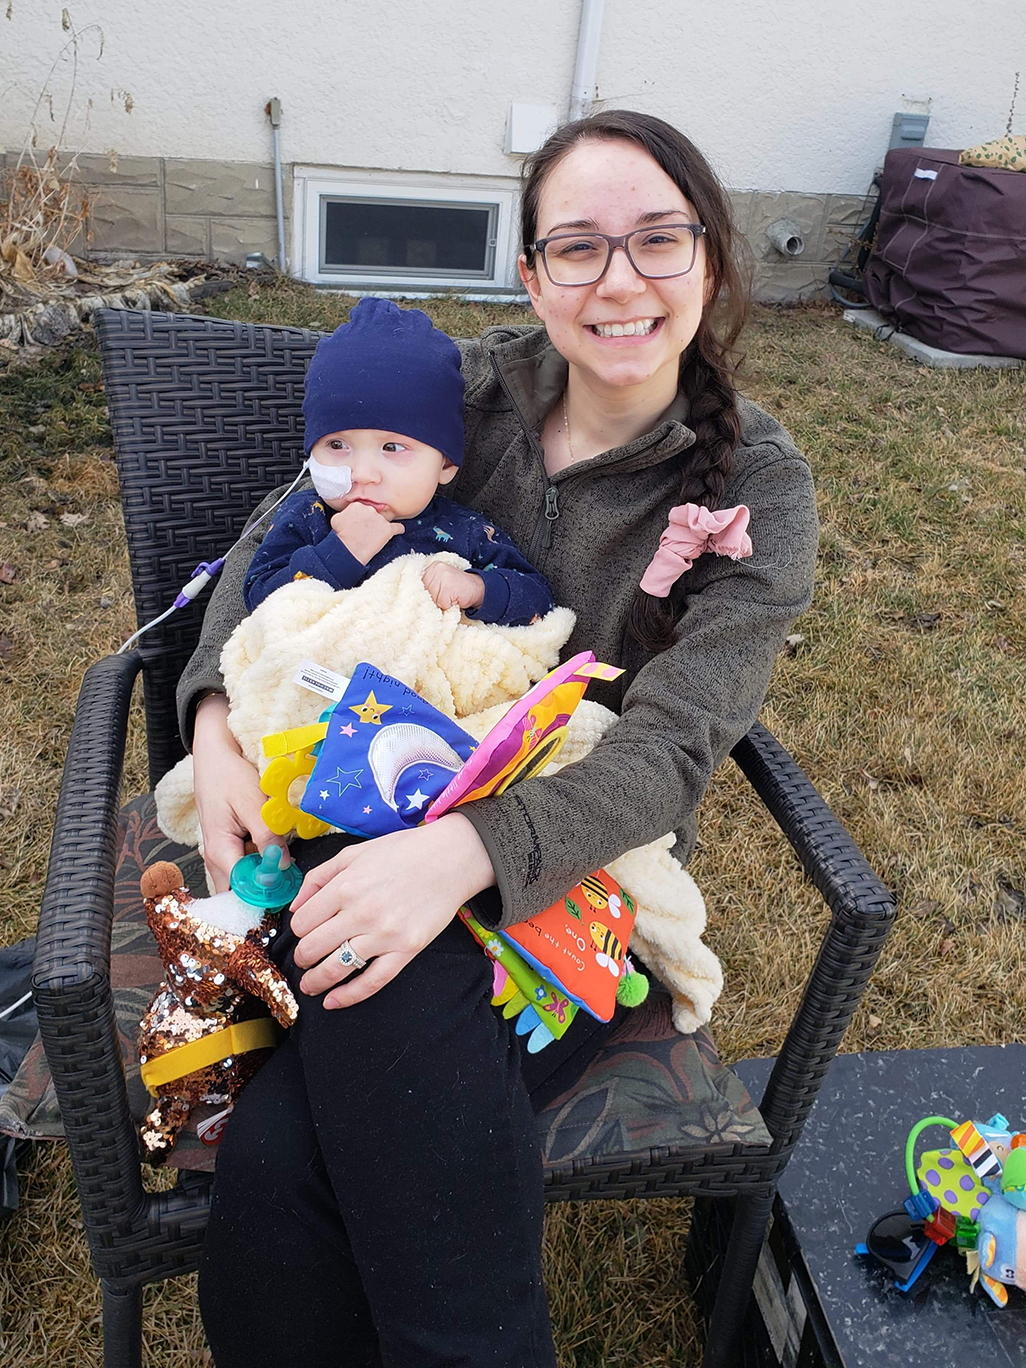 A smiling woman with a baby on her lap sits outside on a lawn chair